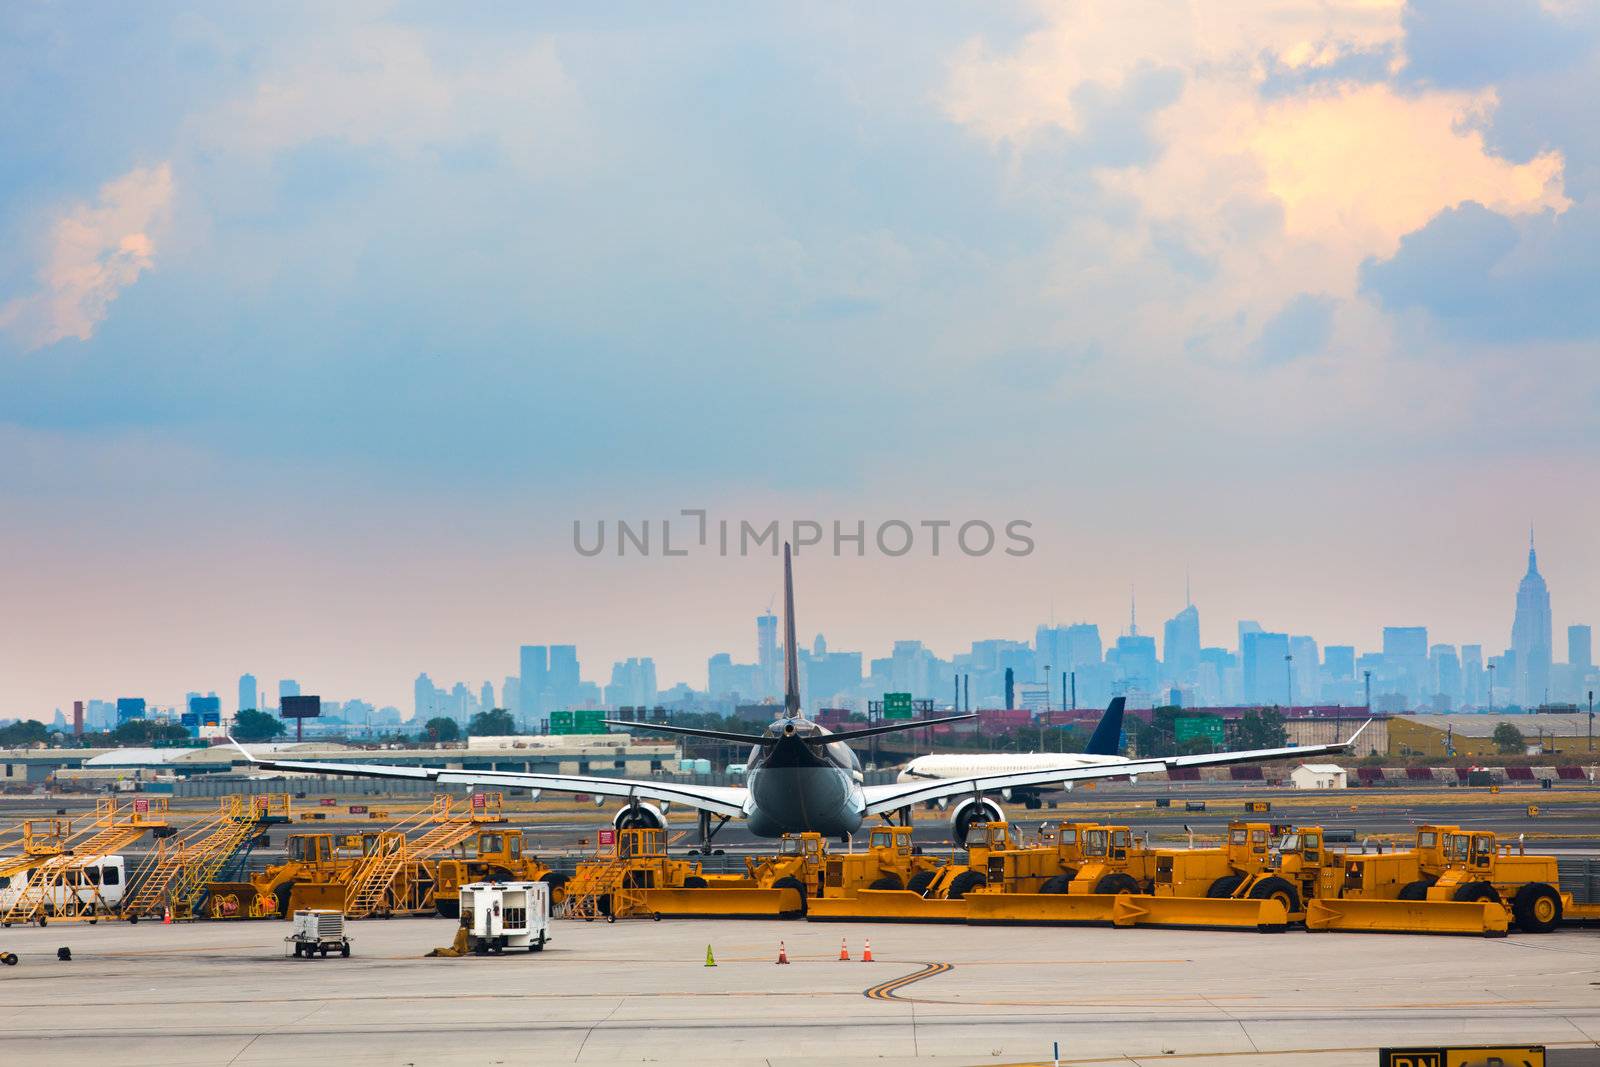 Airports runway and ground services waiting to service. With an airplane in-front of city.